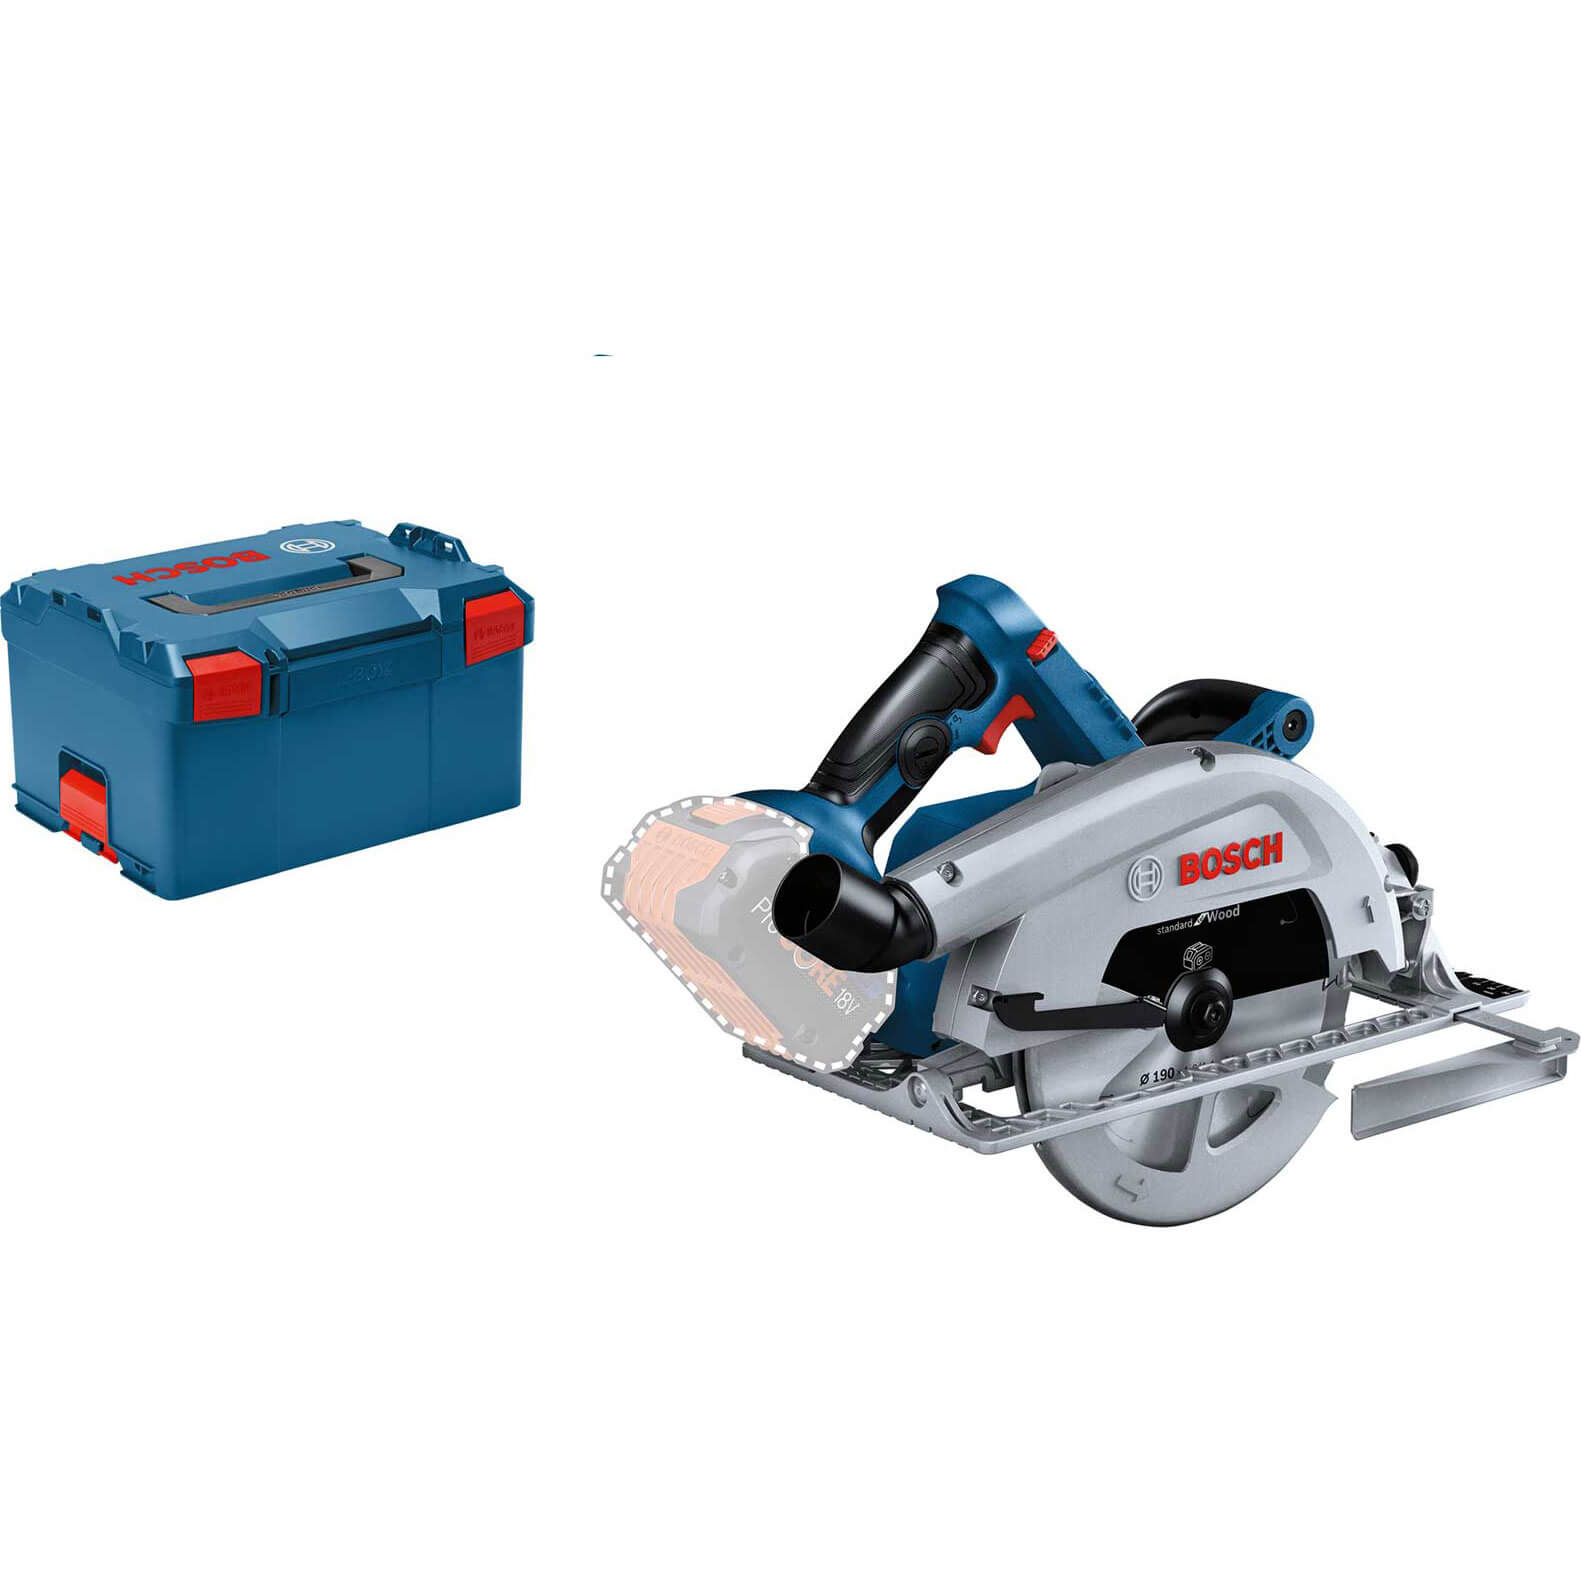 Image of Bosch GKS 18V-68 C BITURBO 18v Brushless Connect Ready Circular Saw 190mm No Batteries No Charger Case